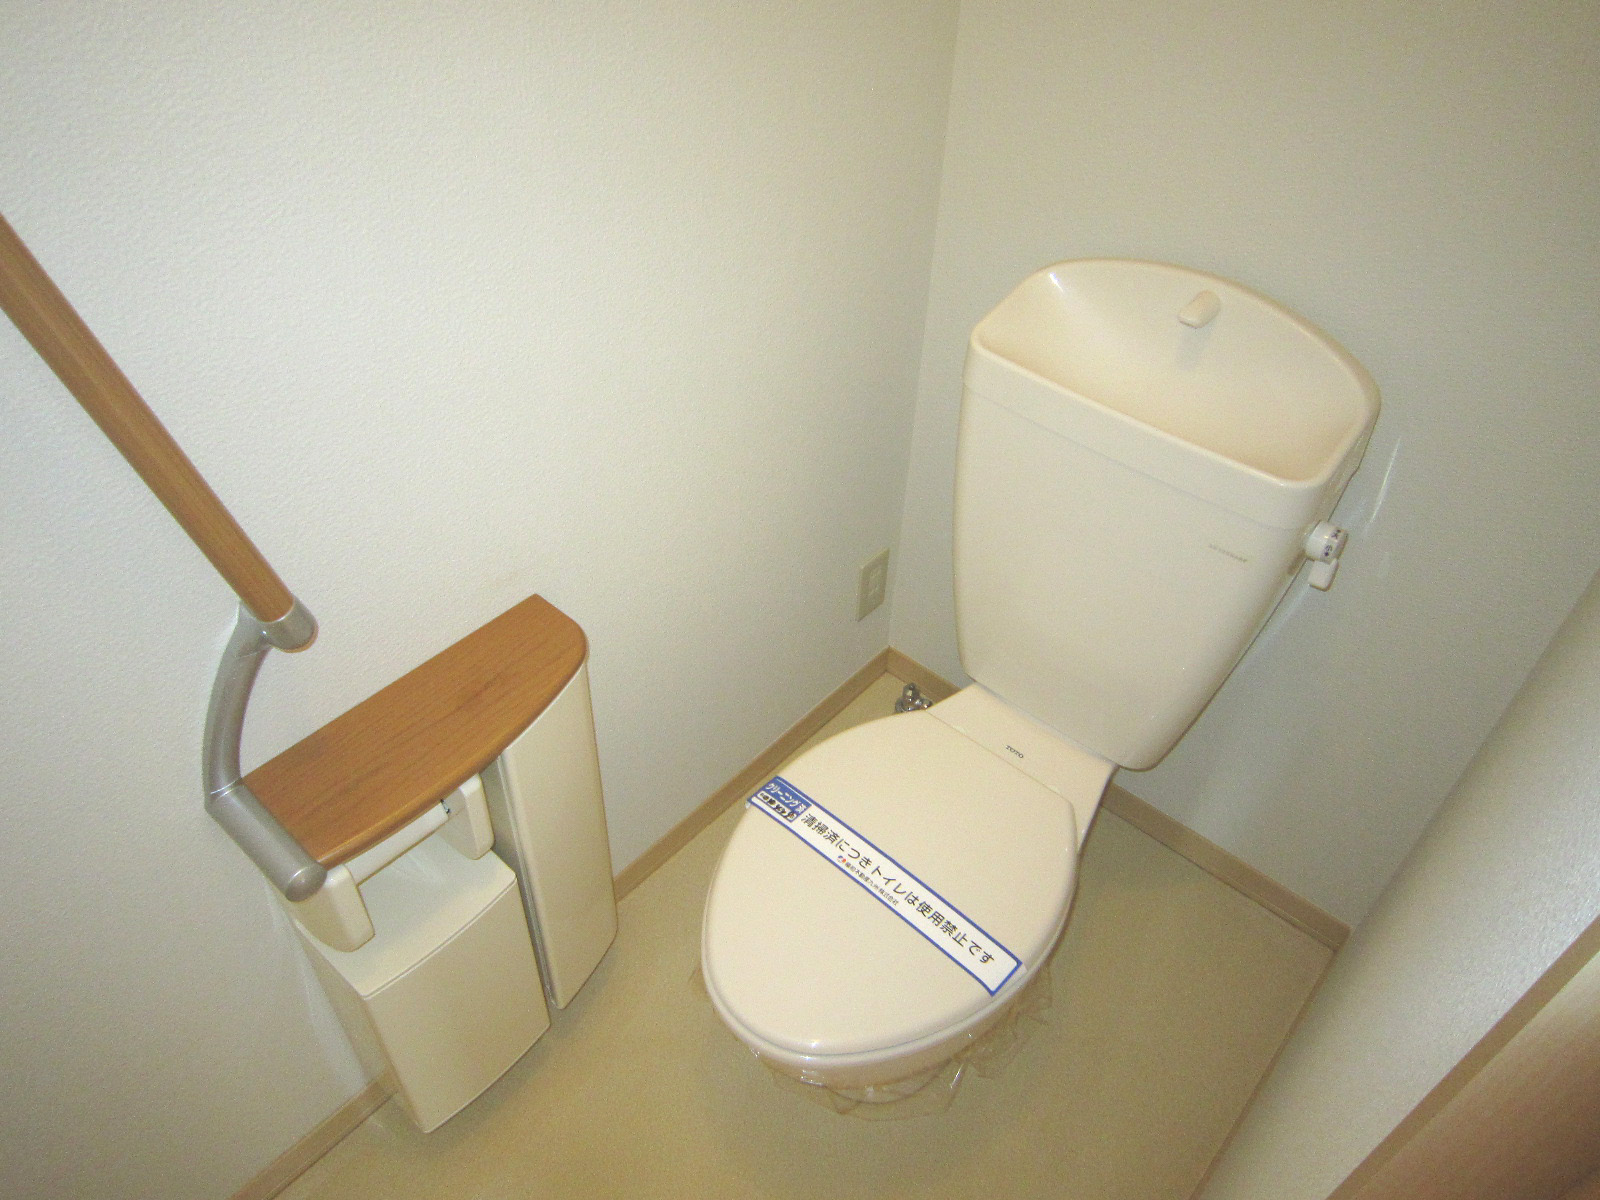 Toilet. handrail ・ Also comfort to the toilet with a shelf.